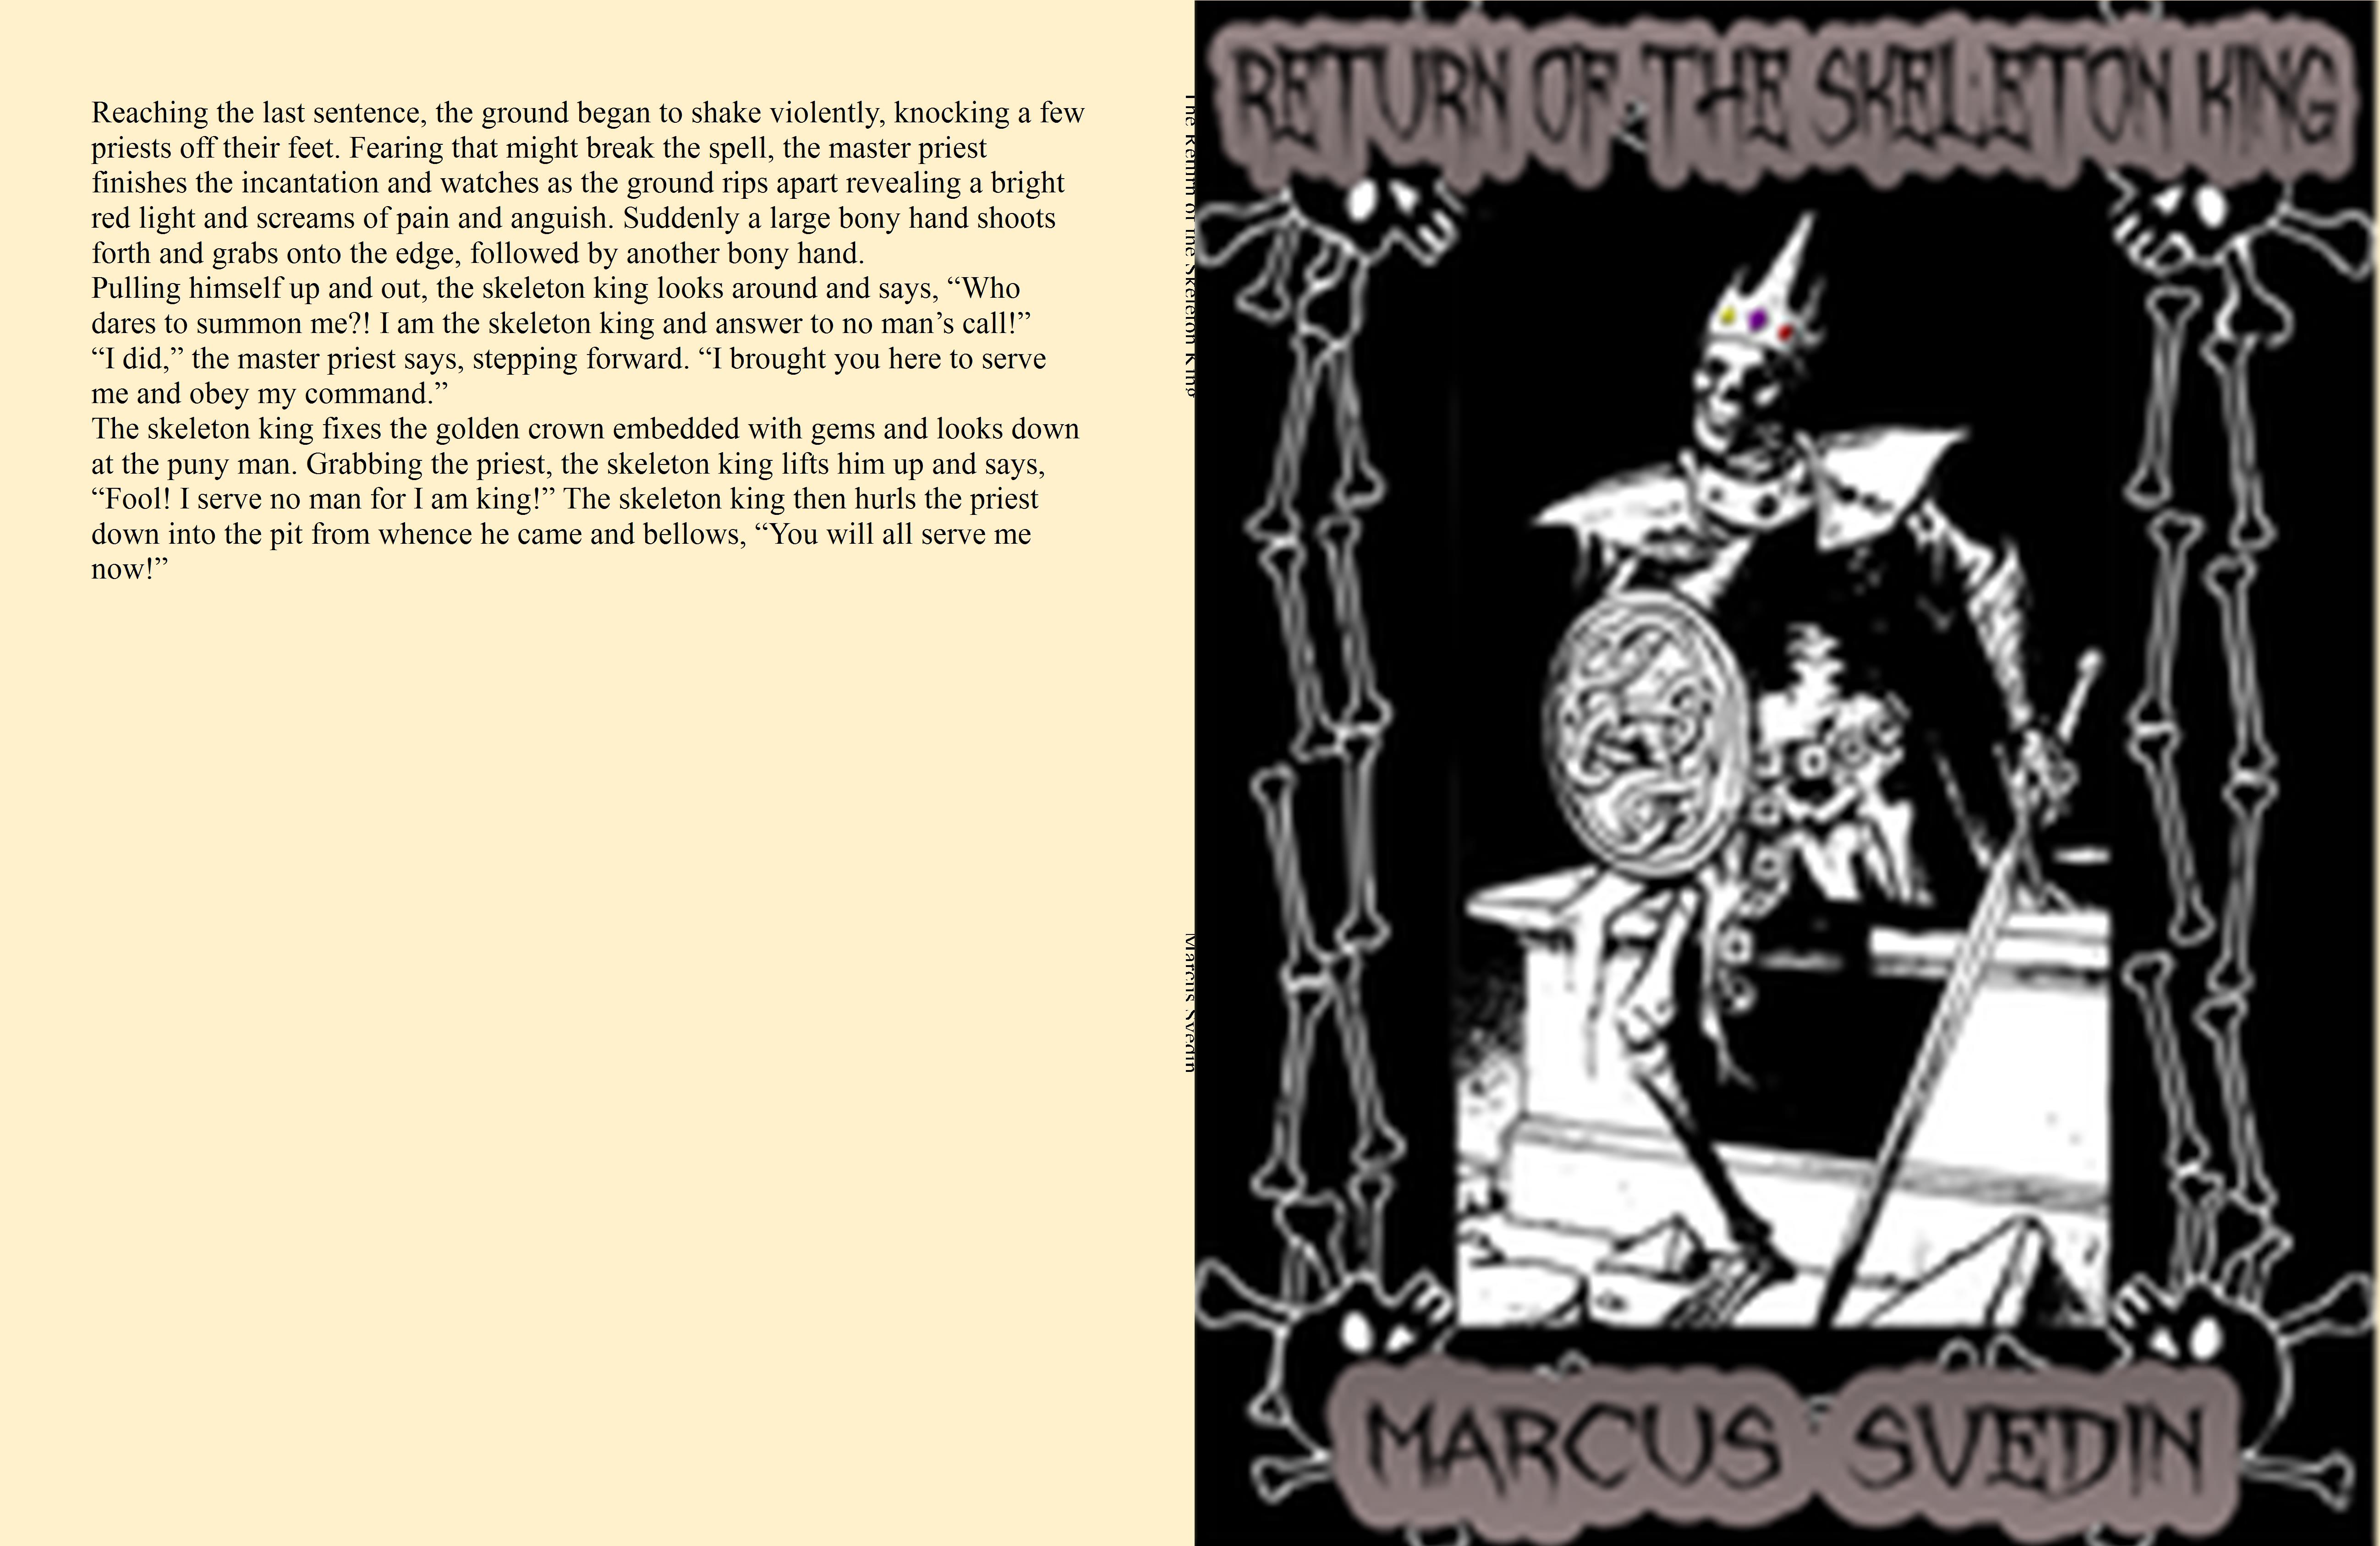 The Return of the Skeleton King cover image